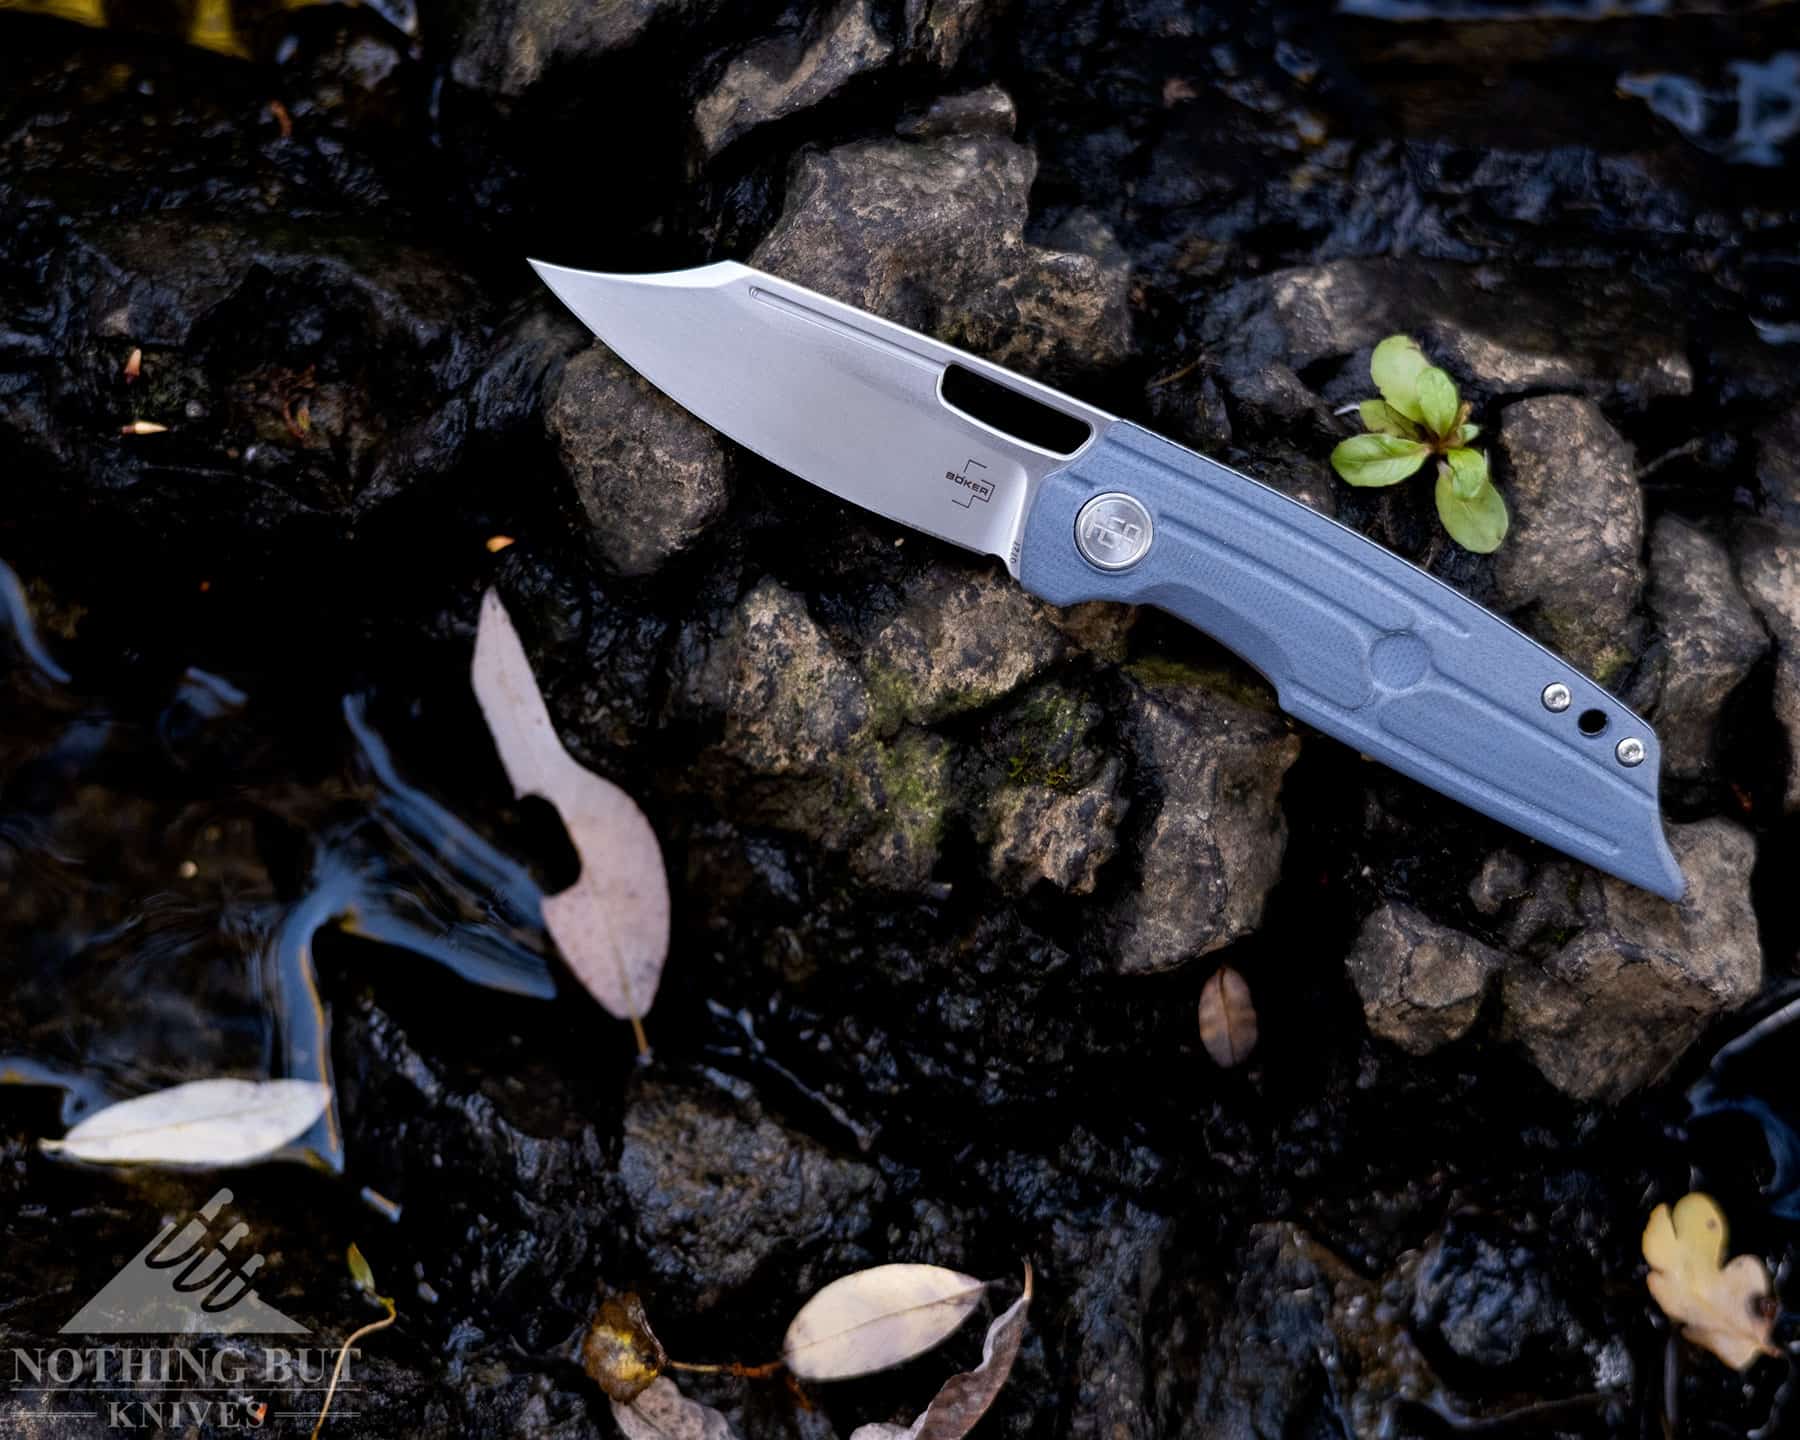 The Boker Plus HEA Hunter is one of our favorite front flippers with a D2 steel blade.